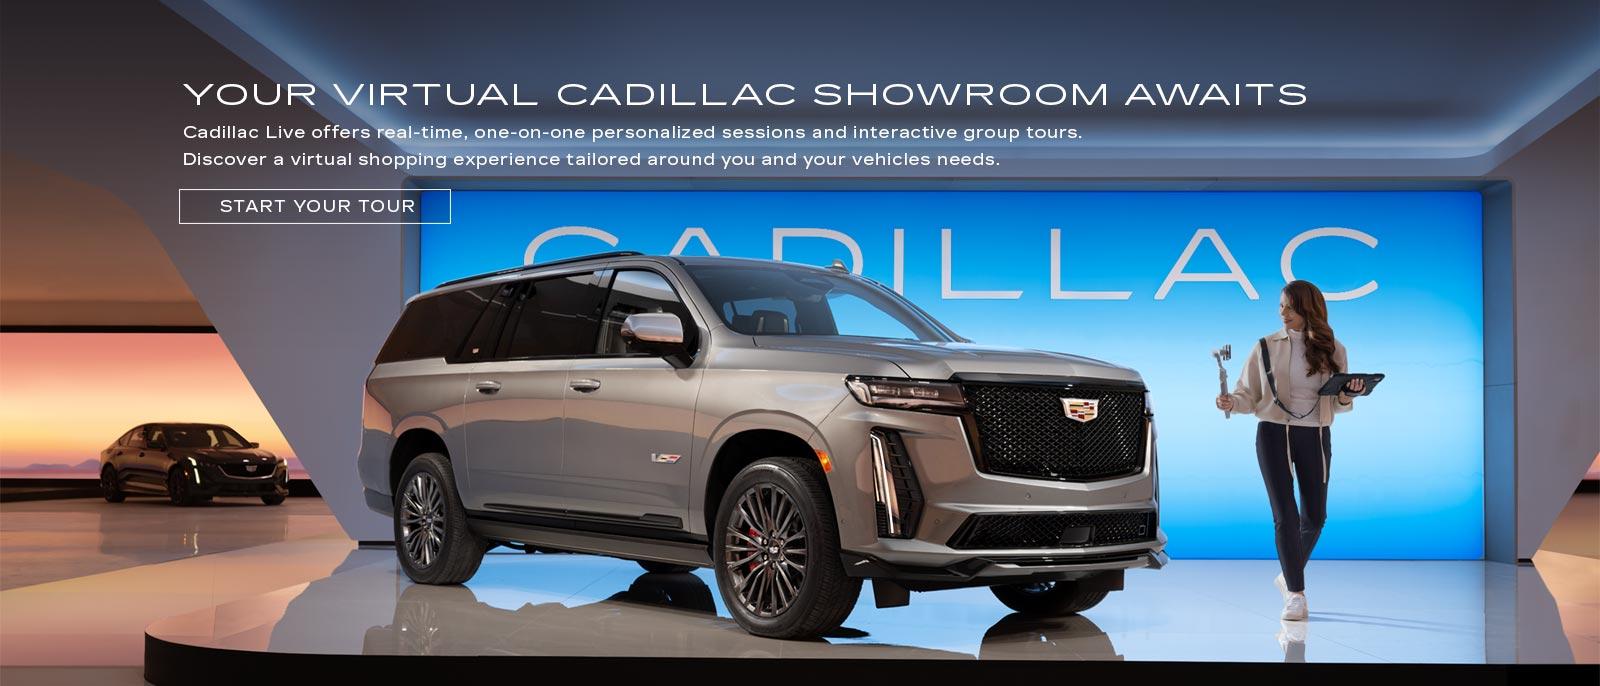 Your Virtual Cadillac Showroom Awaits. Cadillac Live offers real-time, one-on-one personalized sessions and interactive group tours. Discover a virtural shopping expersiance tailored around you and your vehicles needs.